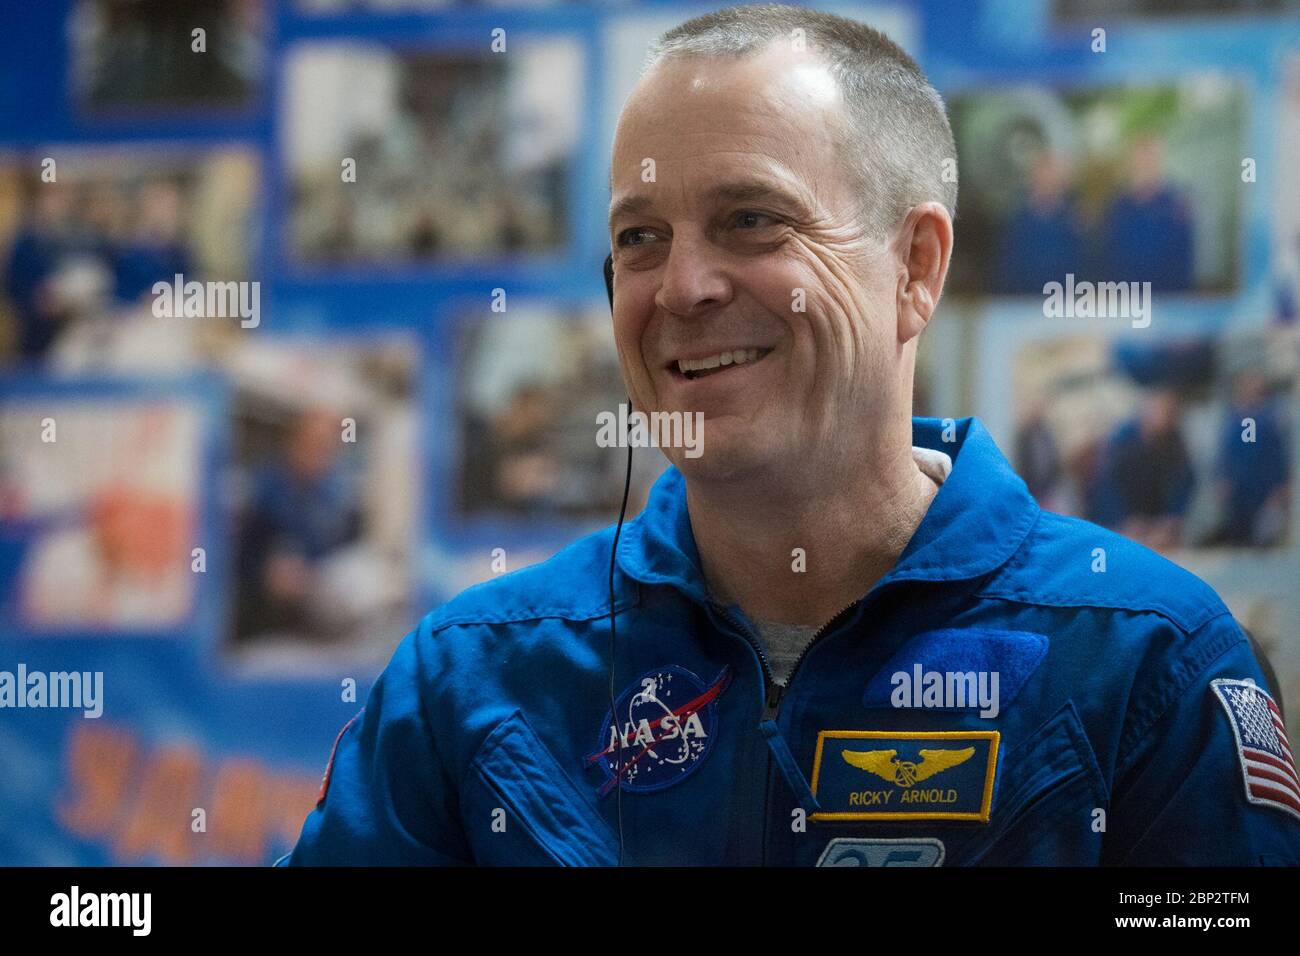 Expedition 55 Press Conference  Expedition 55 flight engineer Ricky Arnold of NASA is seen in quarantine, behind glass, during a press conference, Tuesday, March 20, 2018 at the Cosmonaut Hotel in Baikonur, Kazakhstan. Arnold, Soyuz Commander Oleg Artemyev of Roscosmos, flight engineer Drew Feustel of NASA are scheduled to launch to the International Space Station aboard the Soyuz MS-08 spacecraft on Wednesday, March, 21. Stock Photo